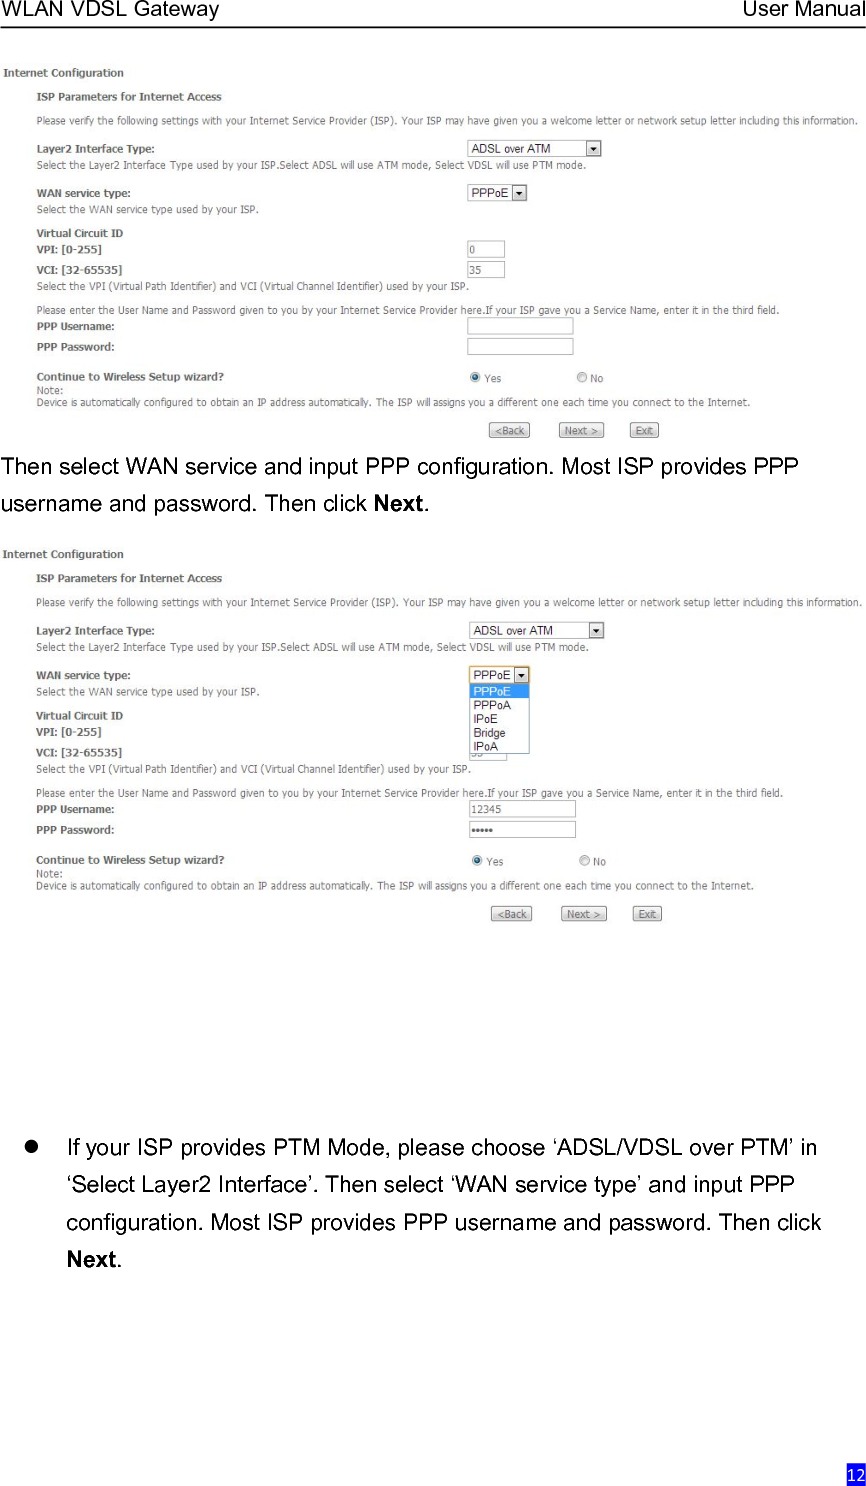 WLAN VDSL Gateway User Manual12Then select WAN service and input PPP configuration. Most ISP provides PPPusername and password. Then click Next.If your ISP provides PTM Mode, please choose ‘ADSL/VDSL over PTM’ in‘Select Layer2 Interface’. Then select ‘WAN service type’ and input PPPconfiguration. Most ISP provides PPP username and password. Then clickNext.